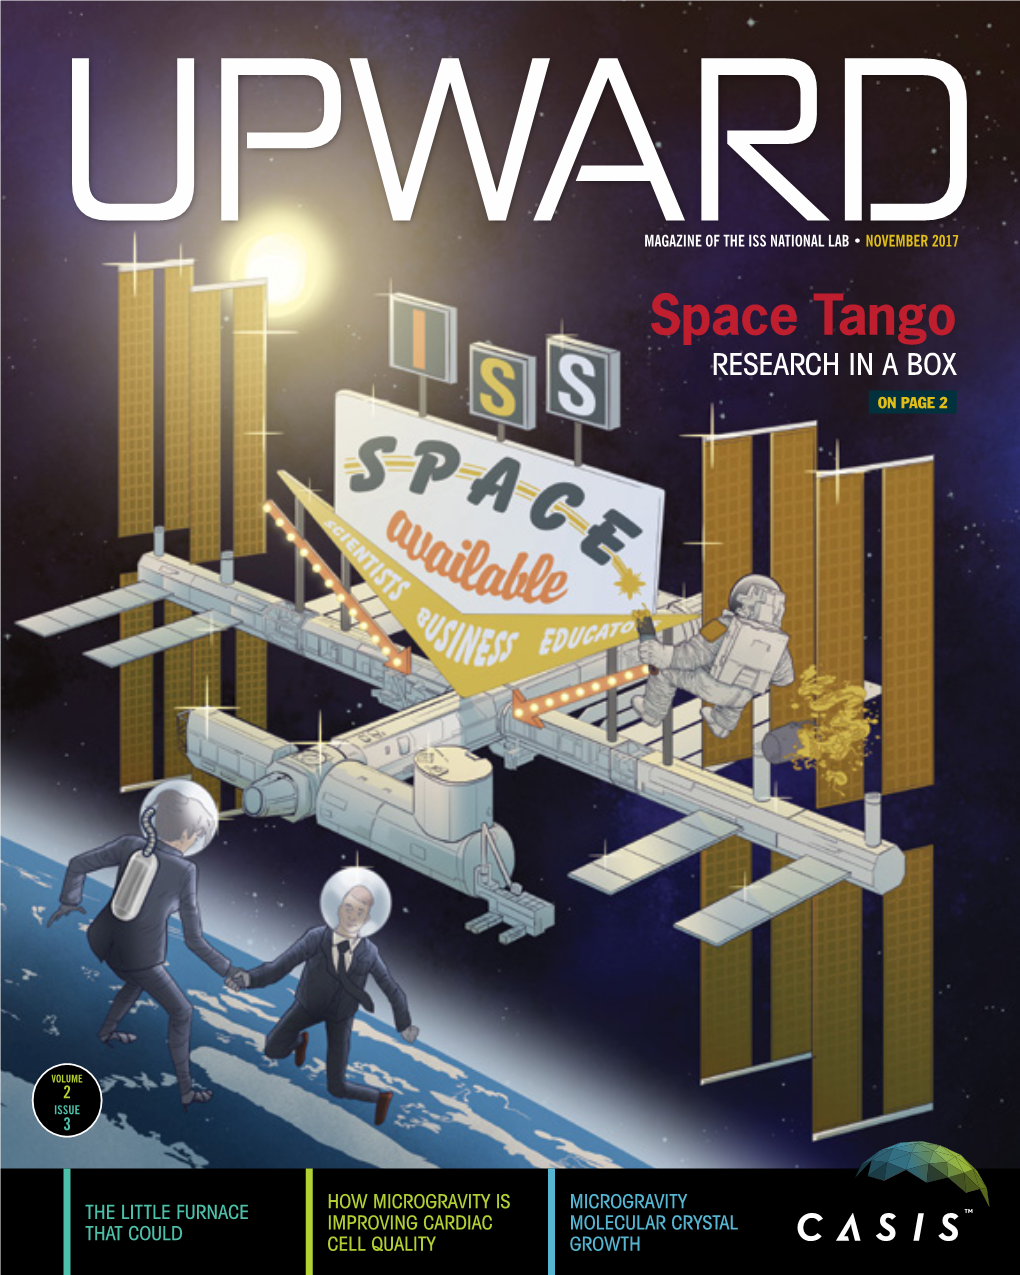 Space Tango RESEARCH in a BOX on PAGE 2